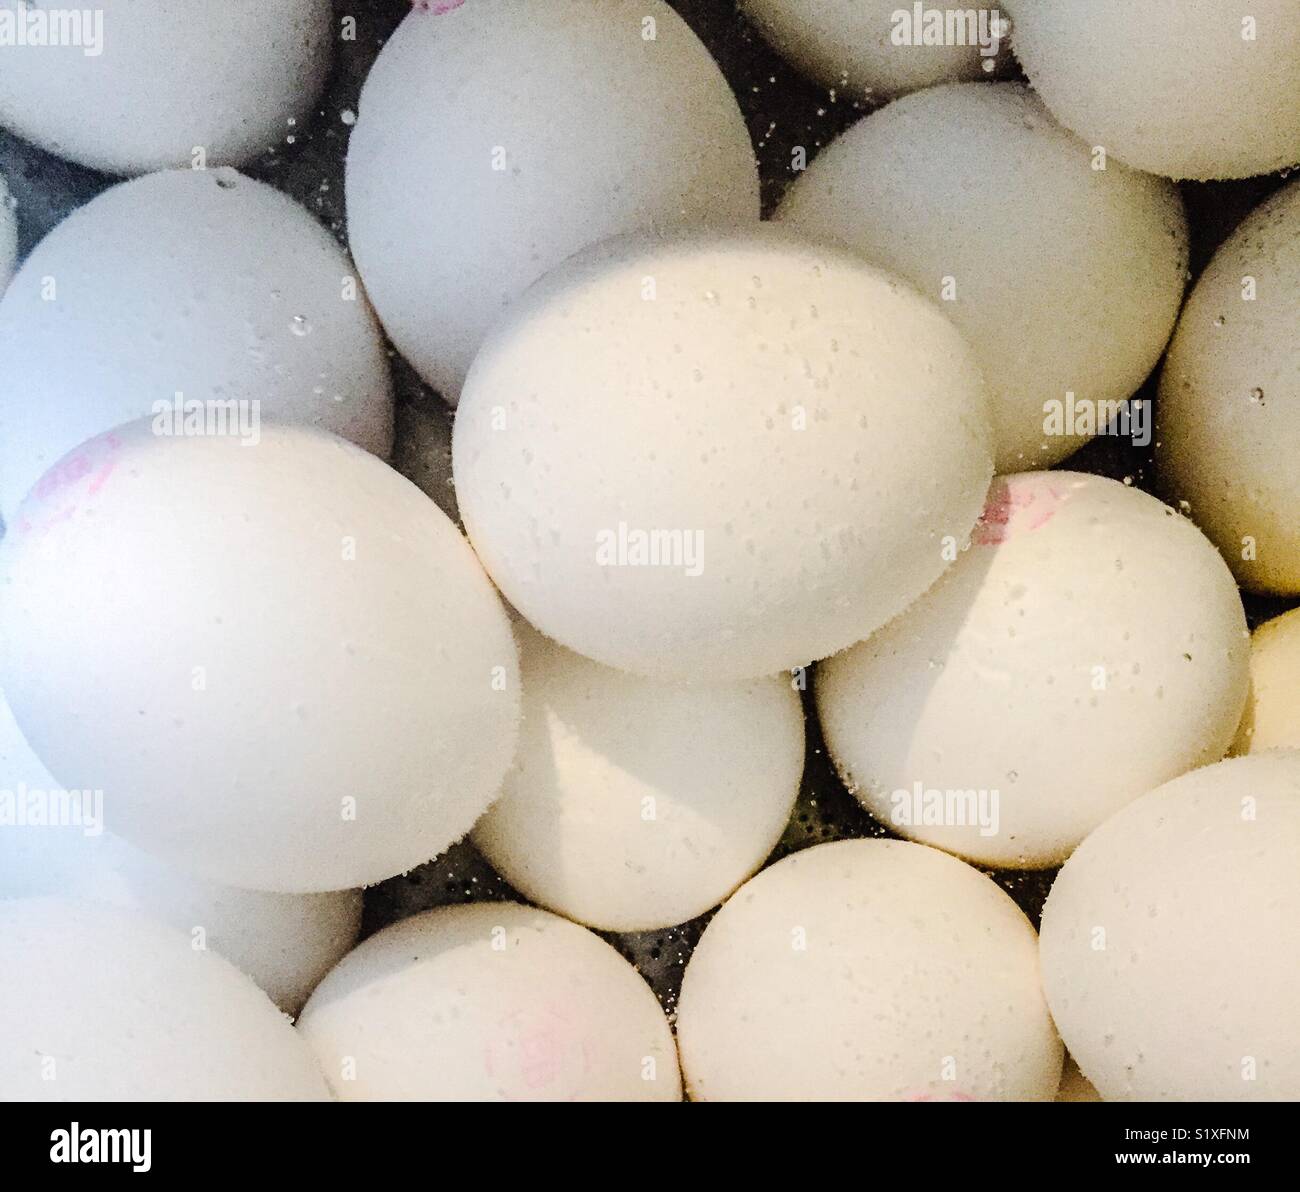 Boiling eggs Stock Photo